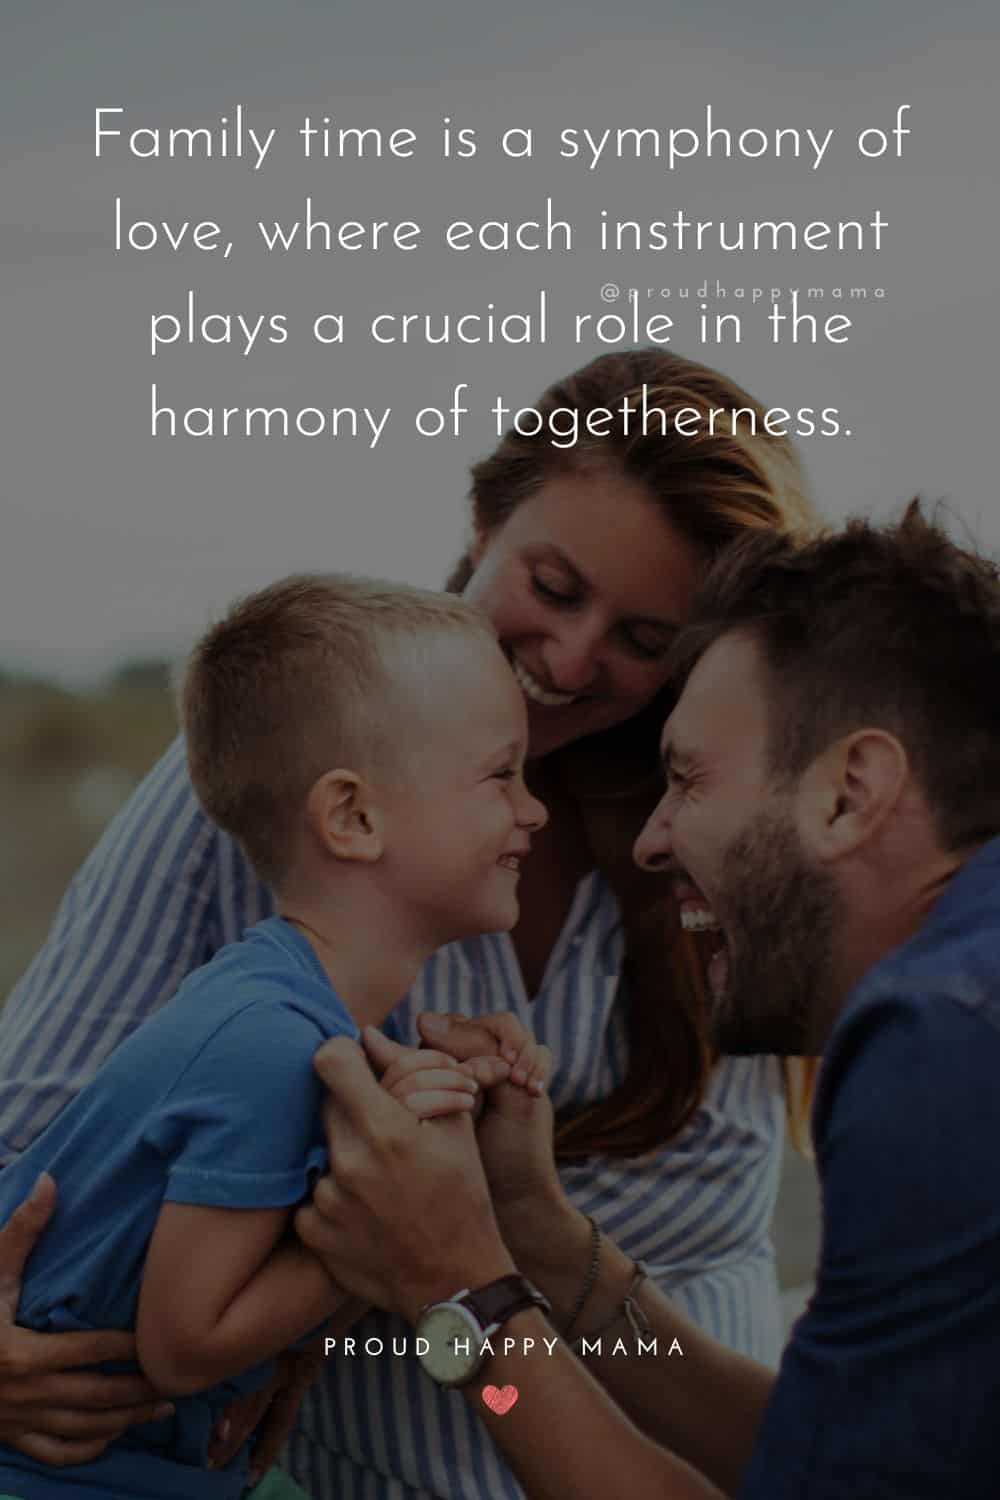 time with family quotes - Family time is a symphony of love, where each instrument plays a crucial role in the harmony of togetherness.